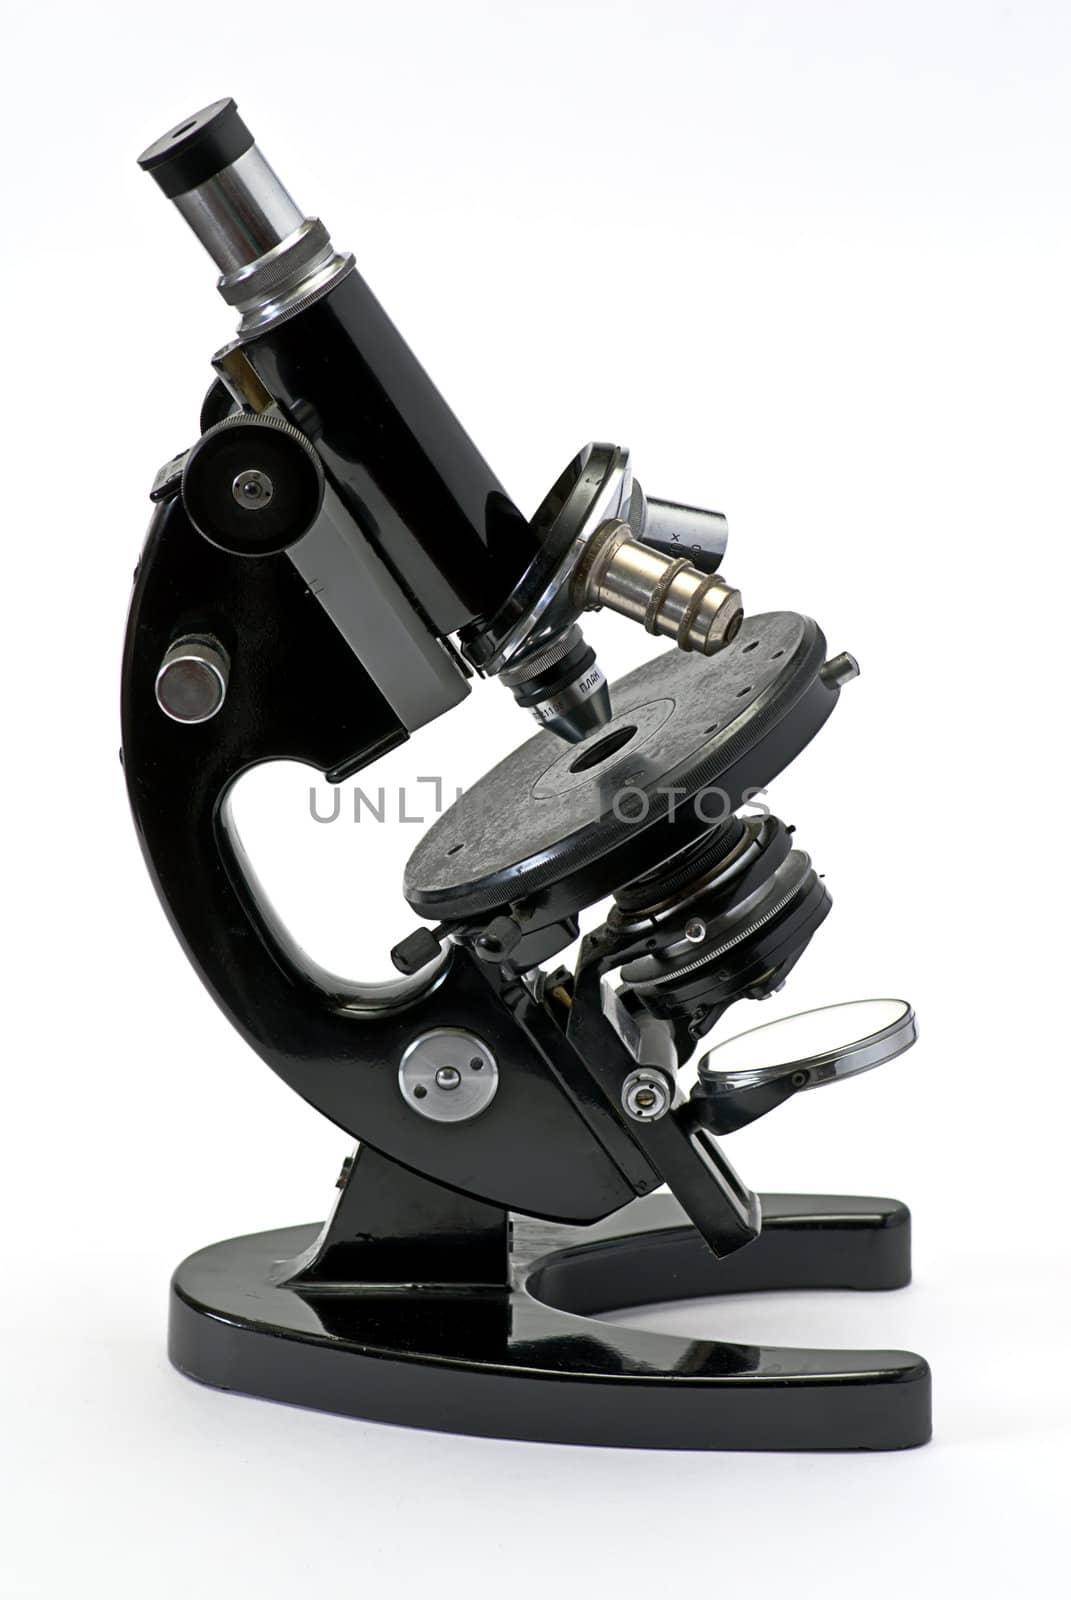 old optical microscope isolated by vikinded